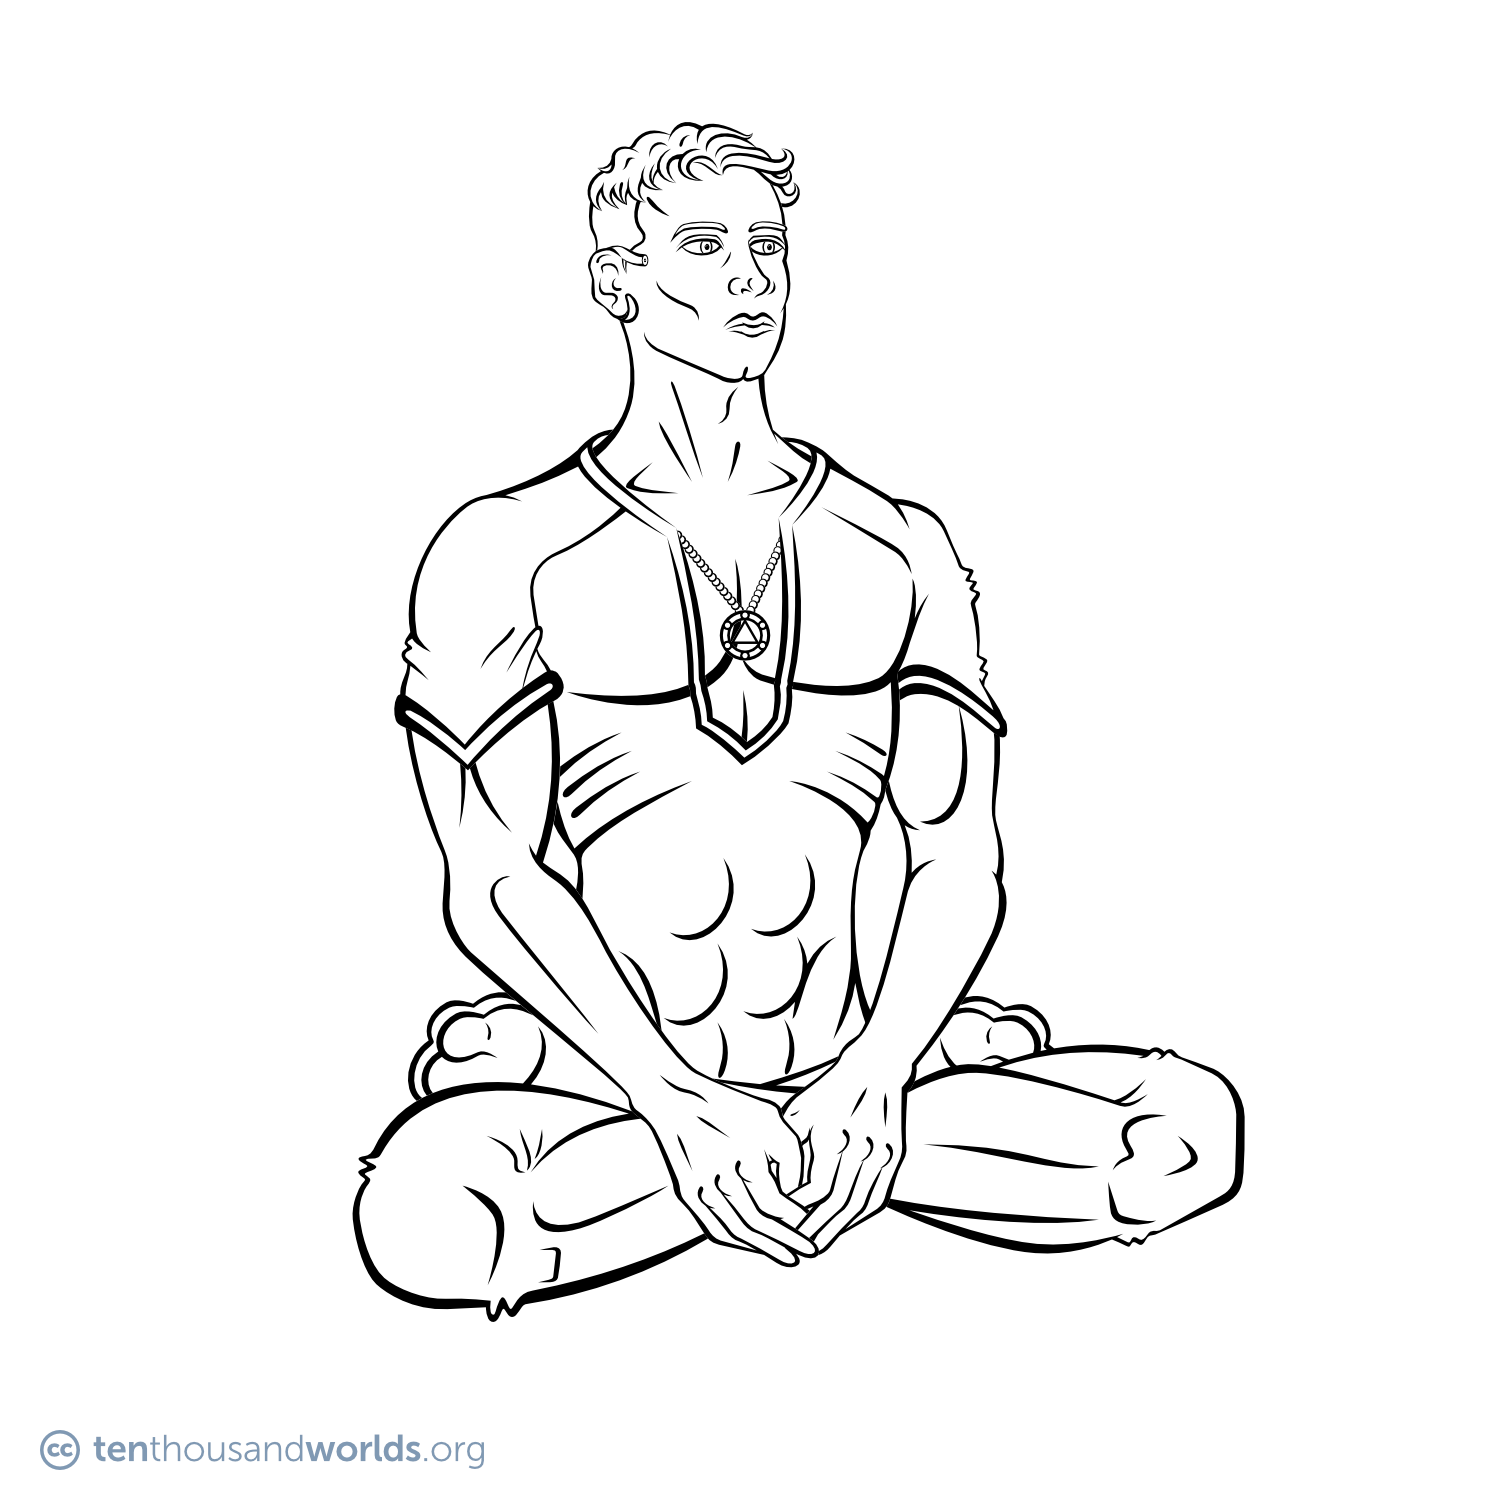 An ink outline of a man sitting cross-legged with his feet pulled up to his hips in a manner similar to a yoga pose. He wears a short-sleeved leotard with a wide-scooped neckline, and within that space a large amulet hangs from a chain. Some sort of device is wrapped around his right ear.